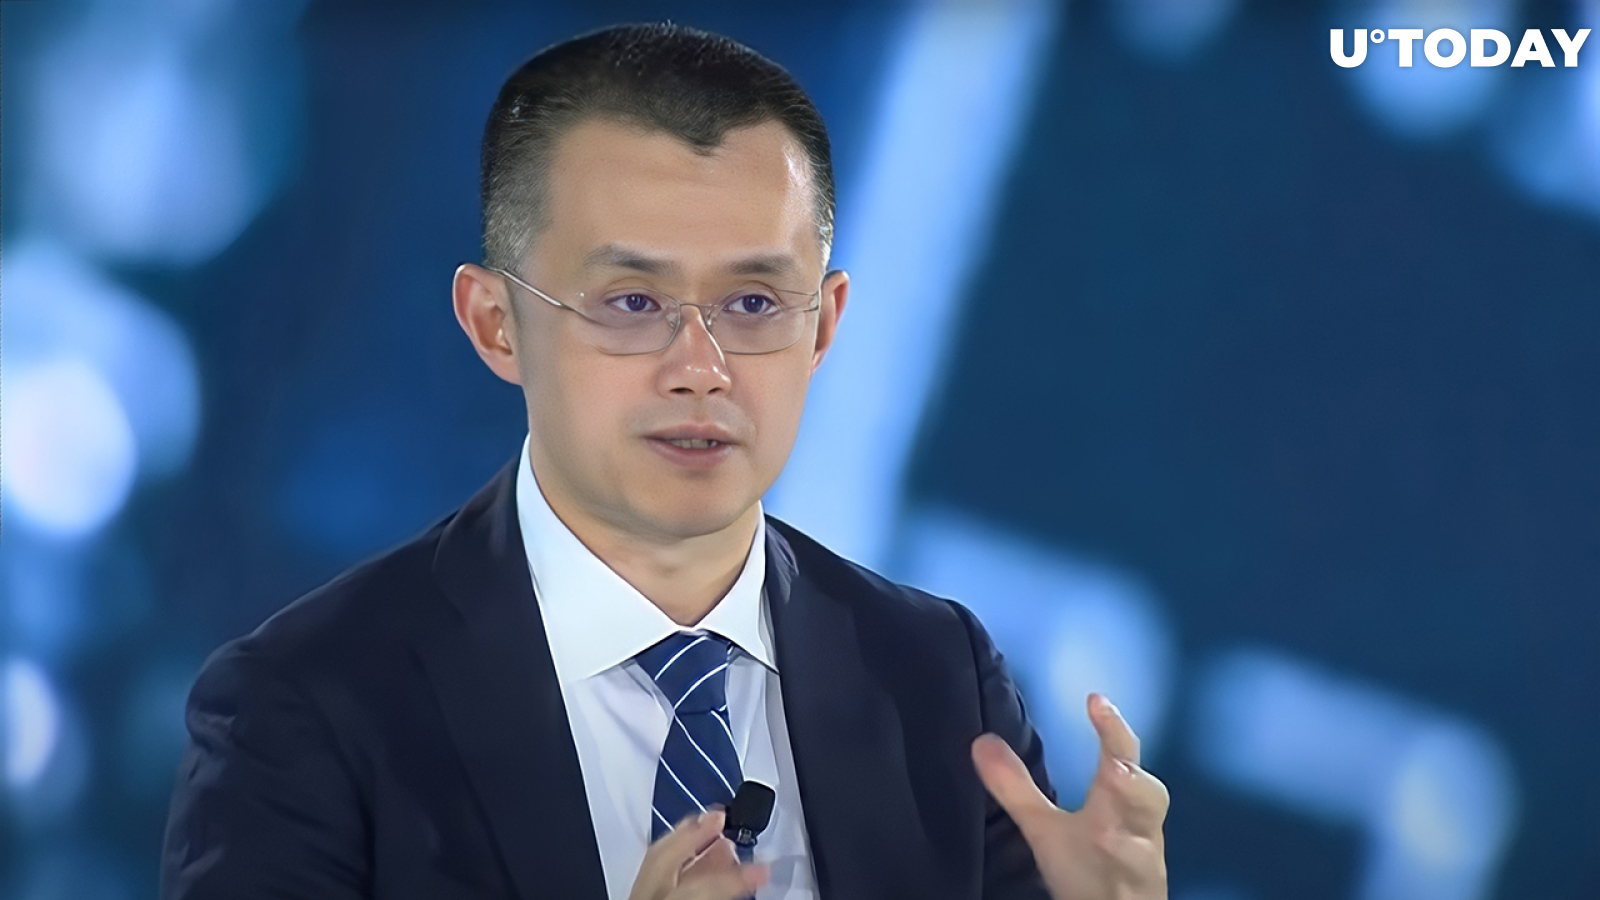 Bitcoin Might Hit $70,000 in Few Months or Years, Says Binance CEO